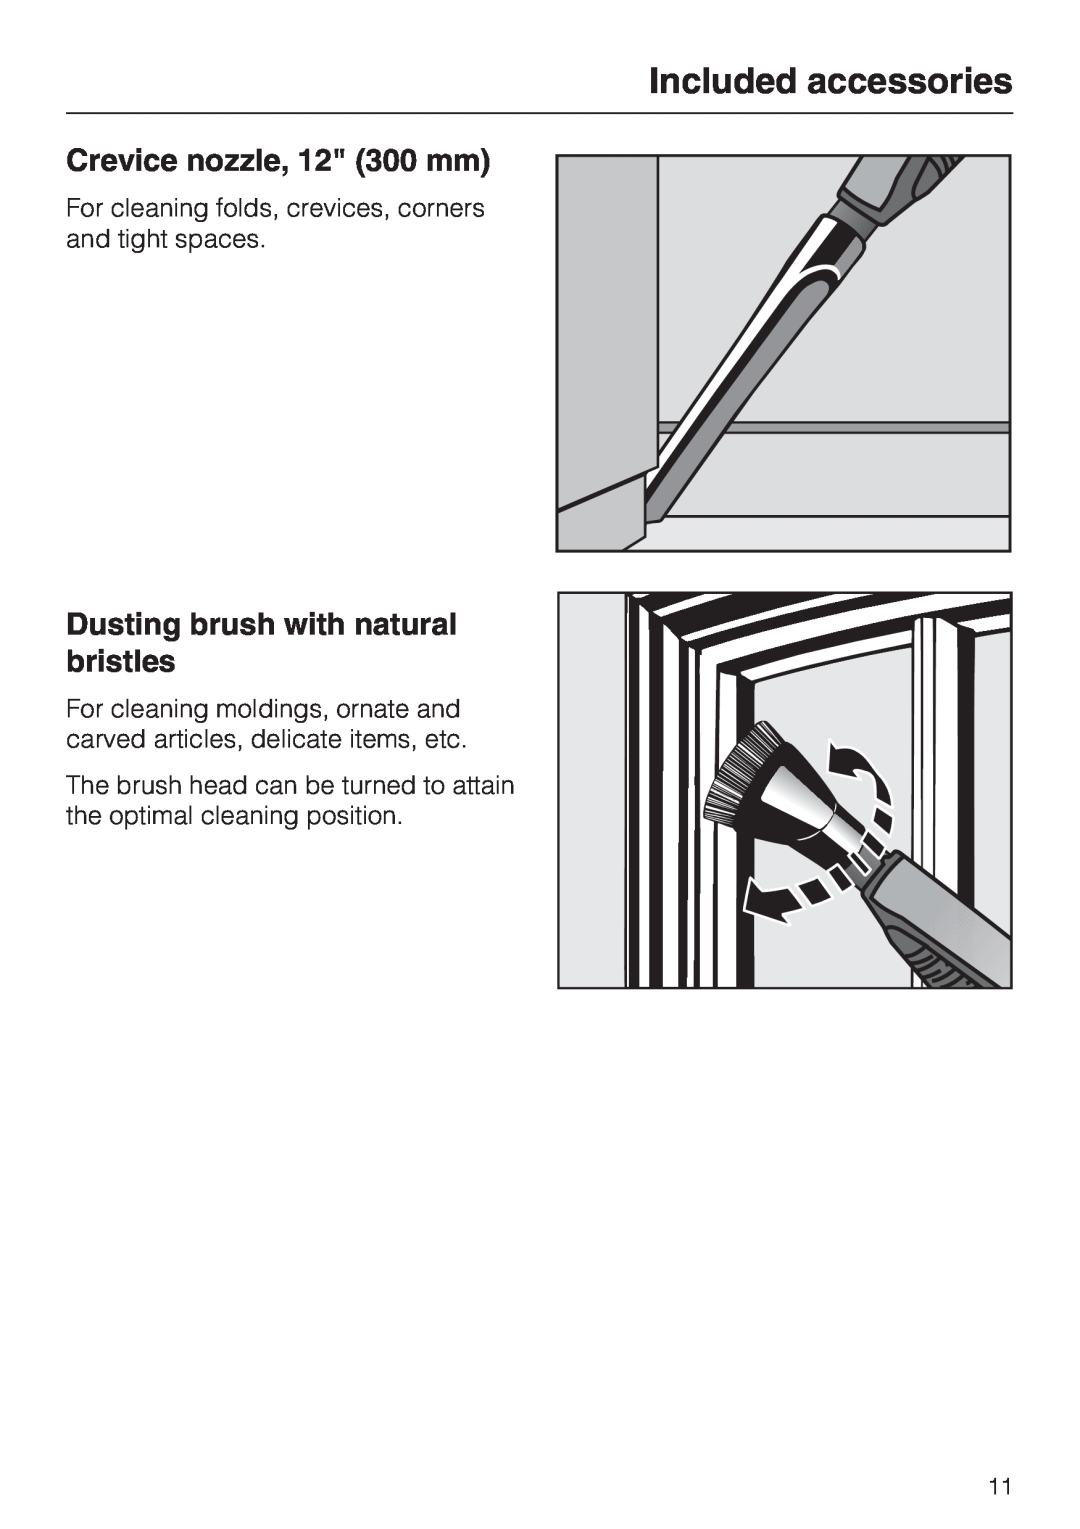 Miele S 7000 operating instructions Crevice nozzle, 12 300 mm, Dusting brush with natural bristles, Included accessories 